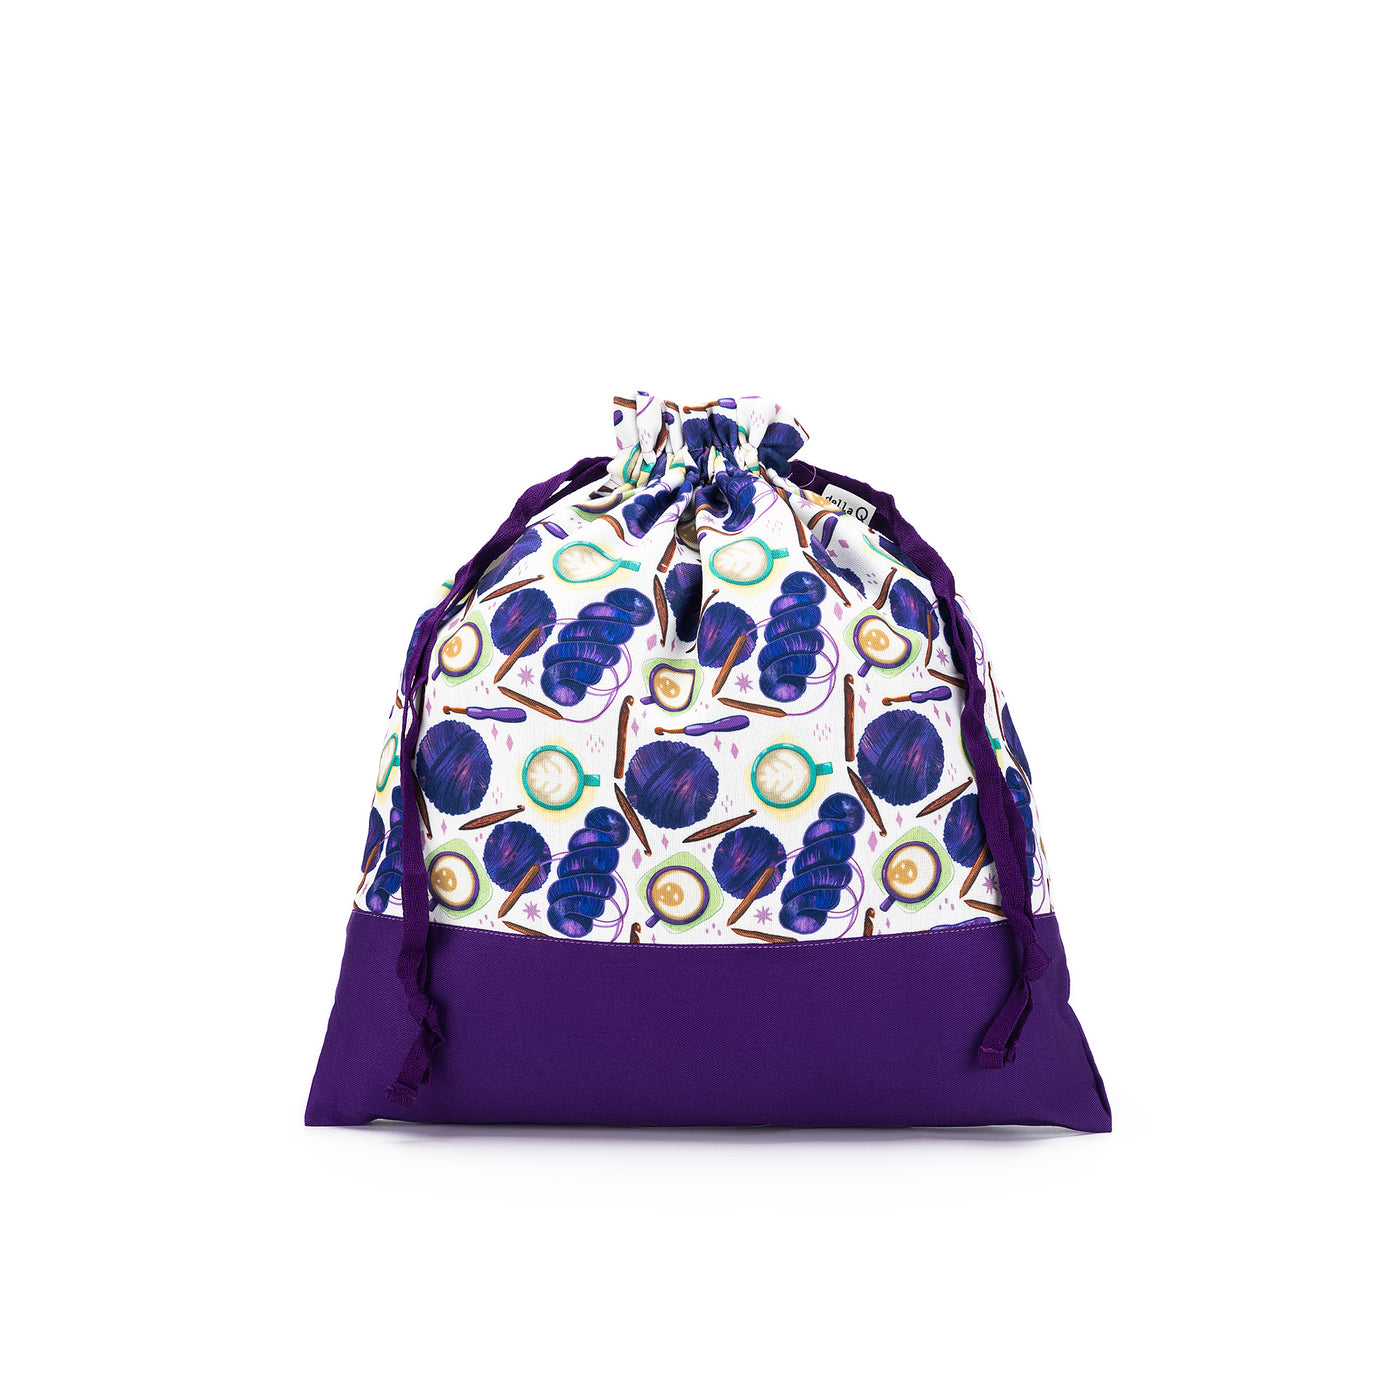 Large Eden Project Bag | Coffee and Yarn Purple Fabric Print